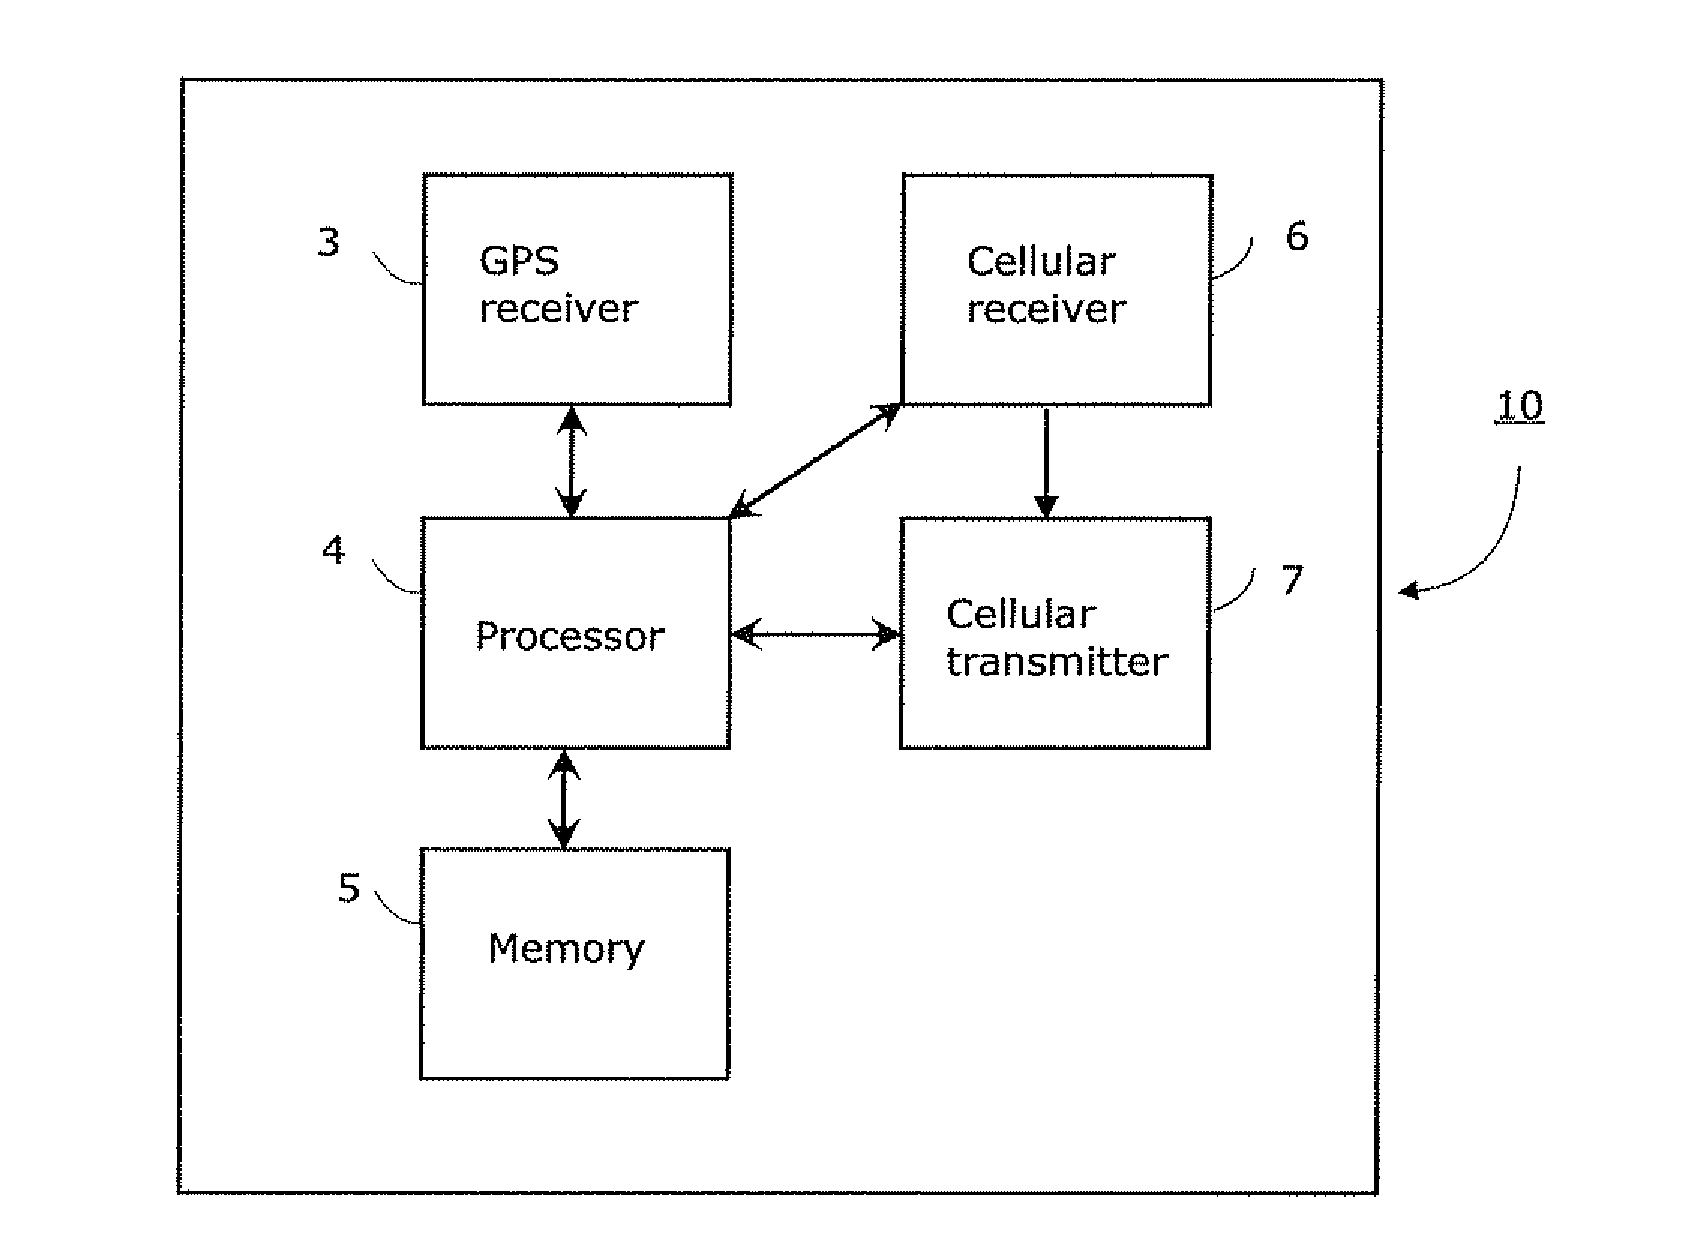 Method and system for refining accuracy of location positioning